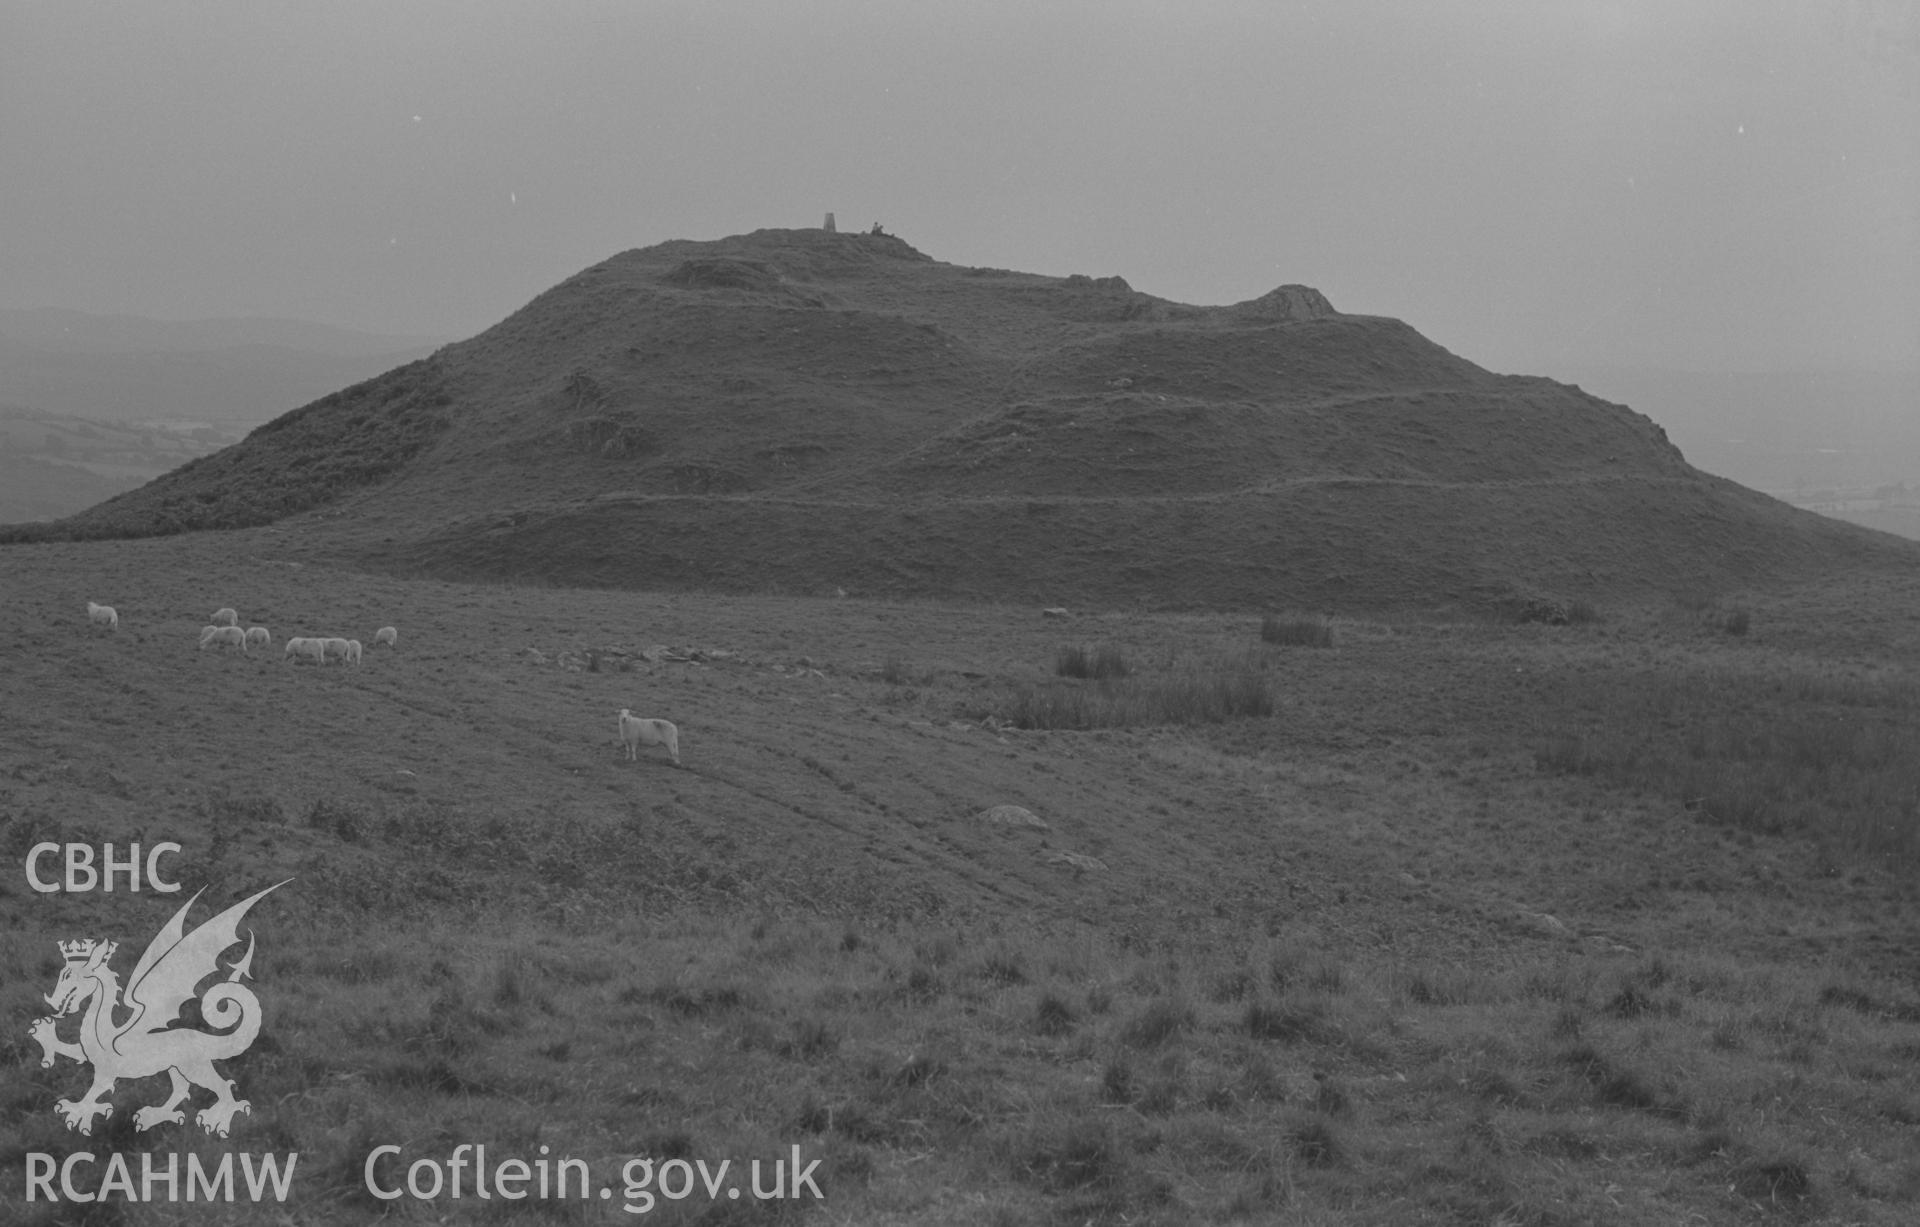 Digital copy of a black and white negative showing Pen y Bannau iron age camp, showing the entrance through the triple rampart at the north end. Photographed by Arthur O. Chater on 25th August 1967, looking south west from Grid Reference SN 743 670.